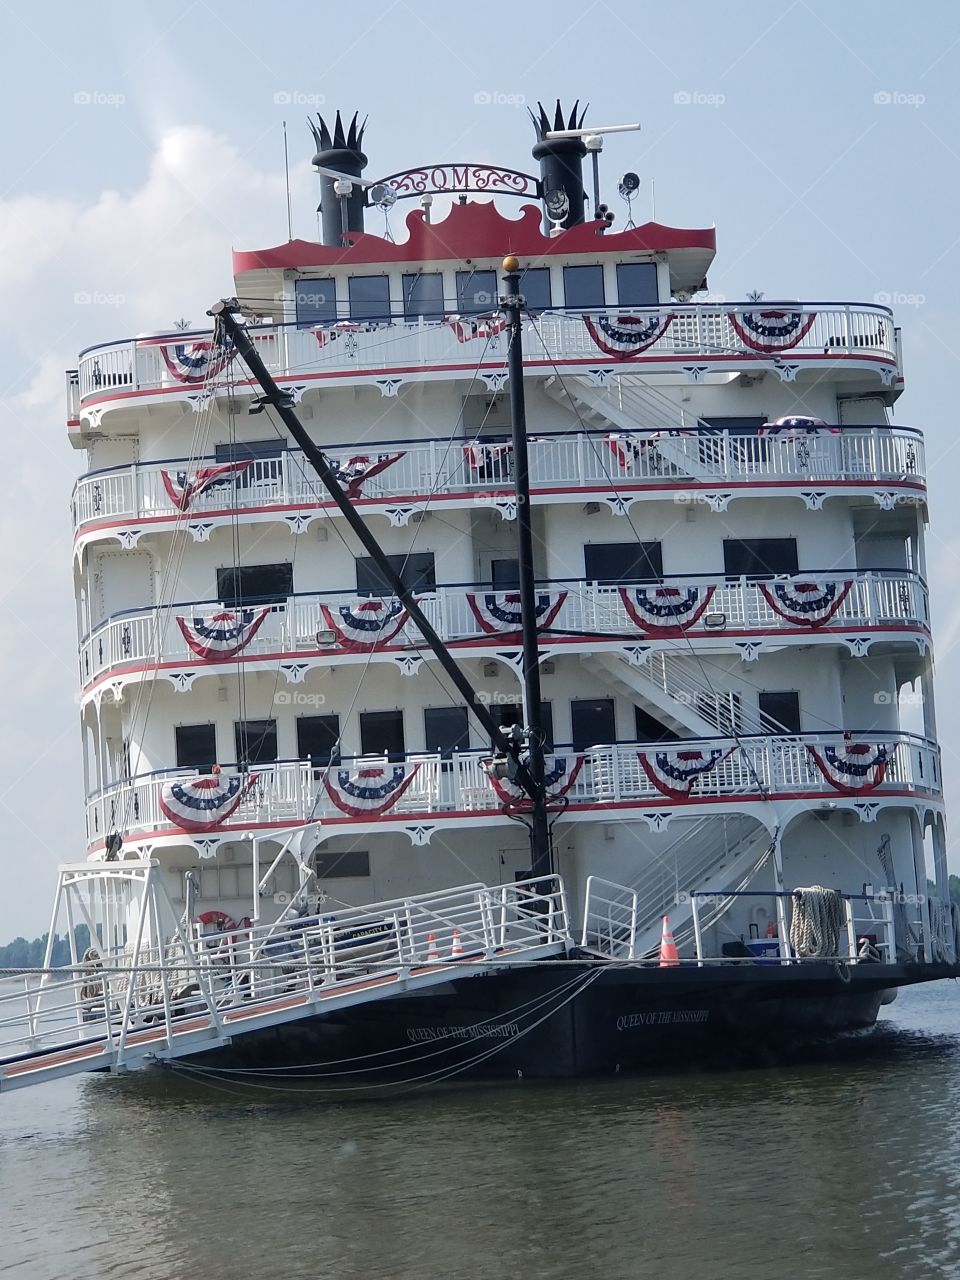 The Queen of the Mississippi decked out for Flag Day!